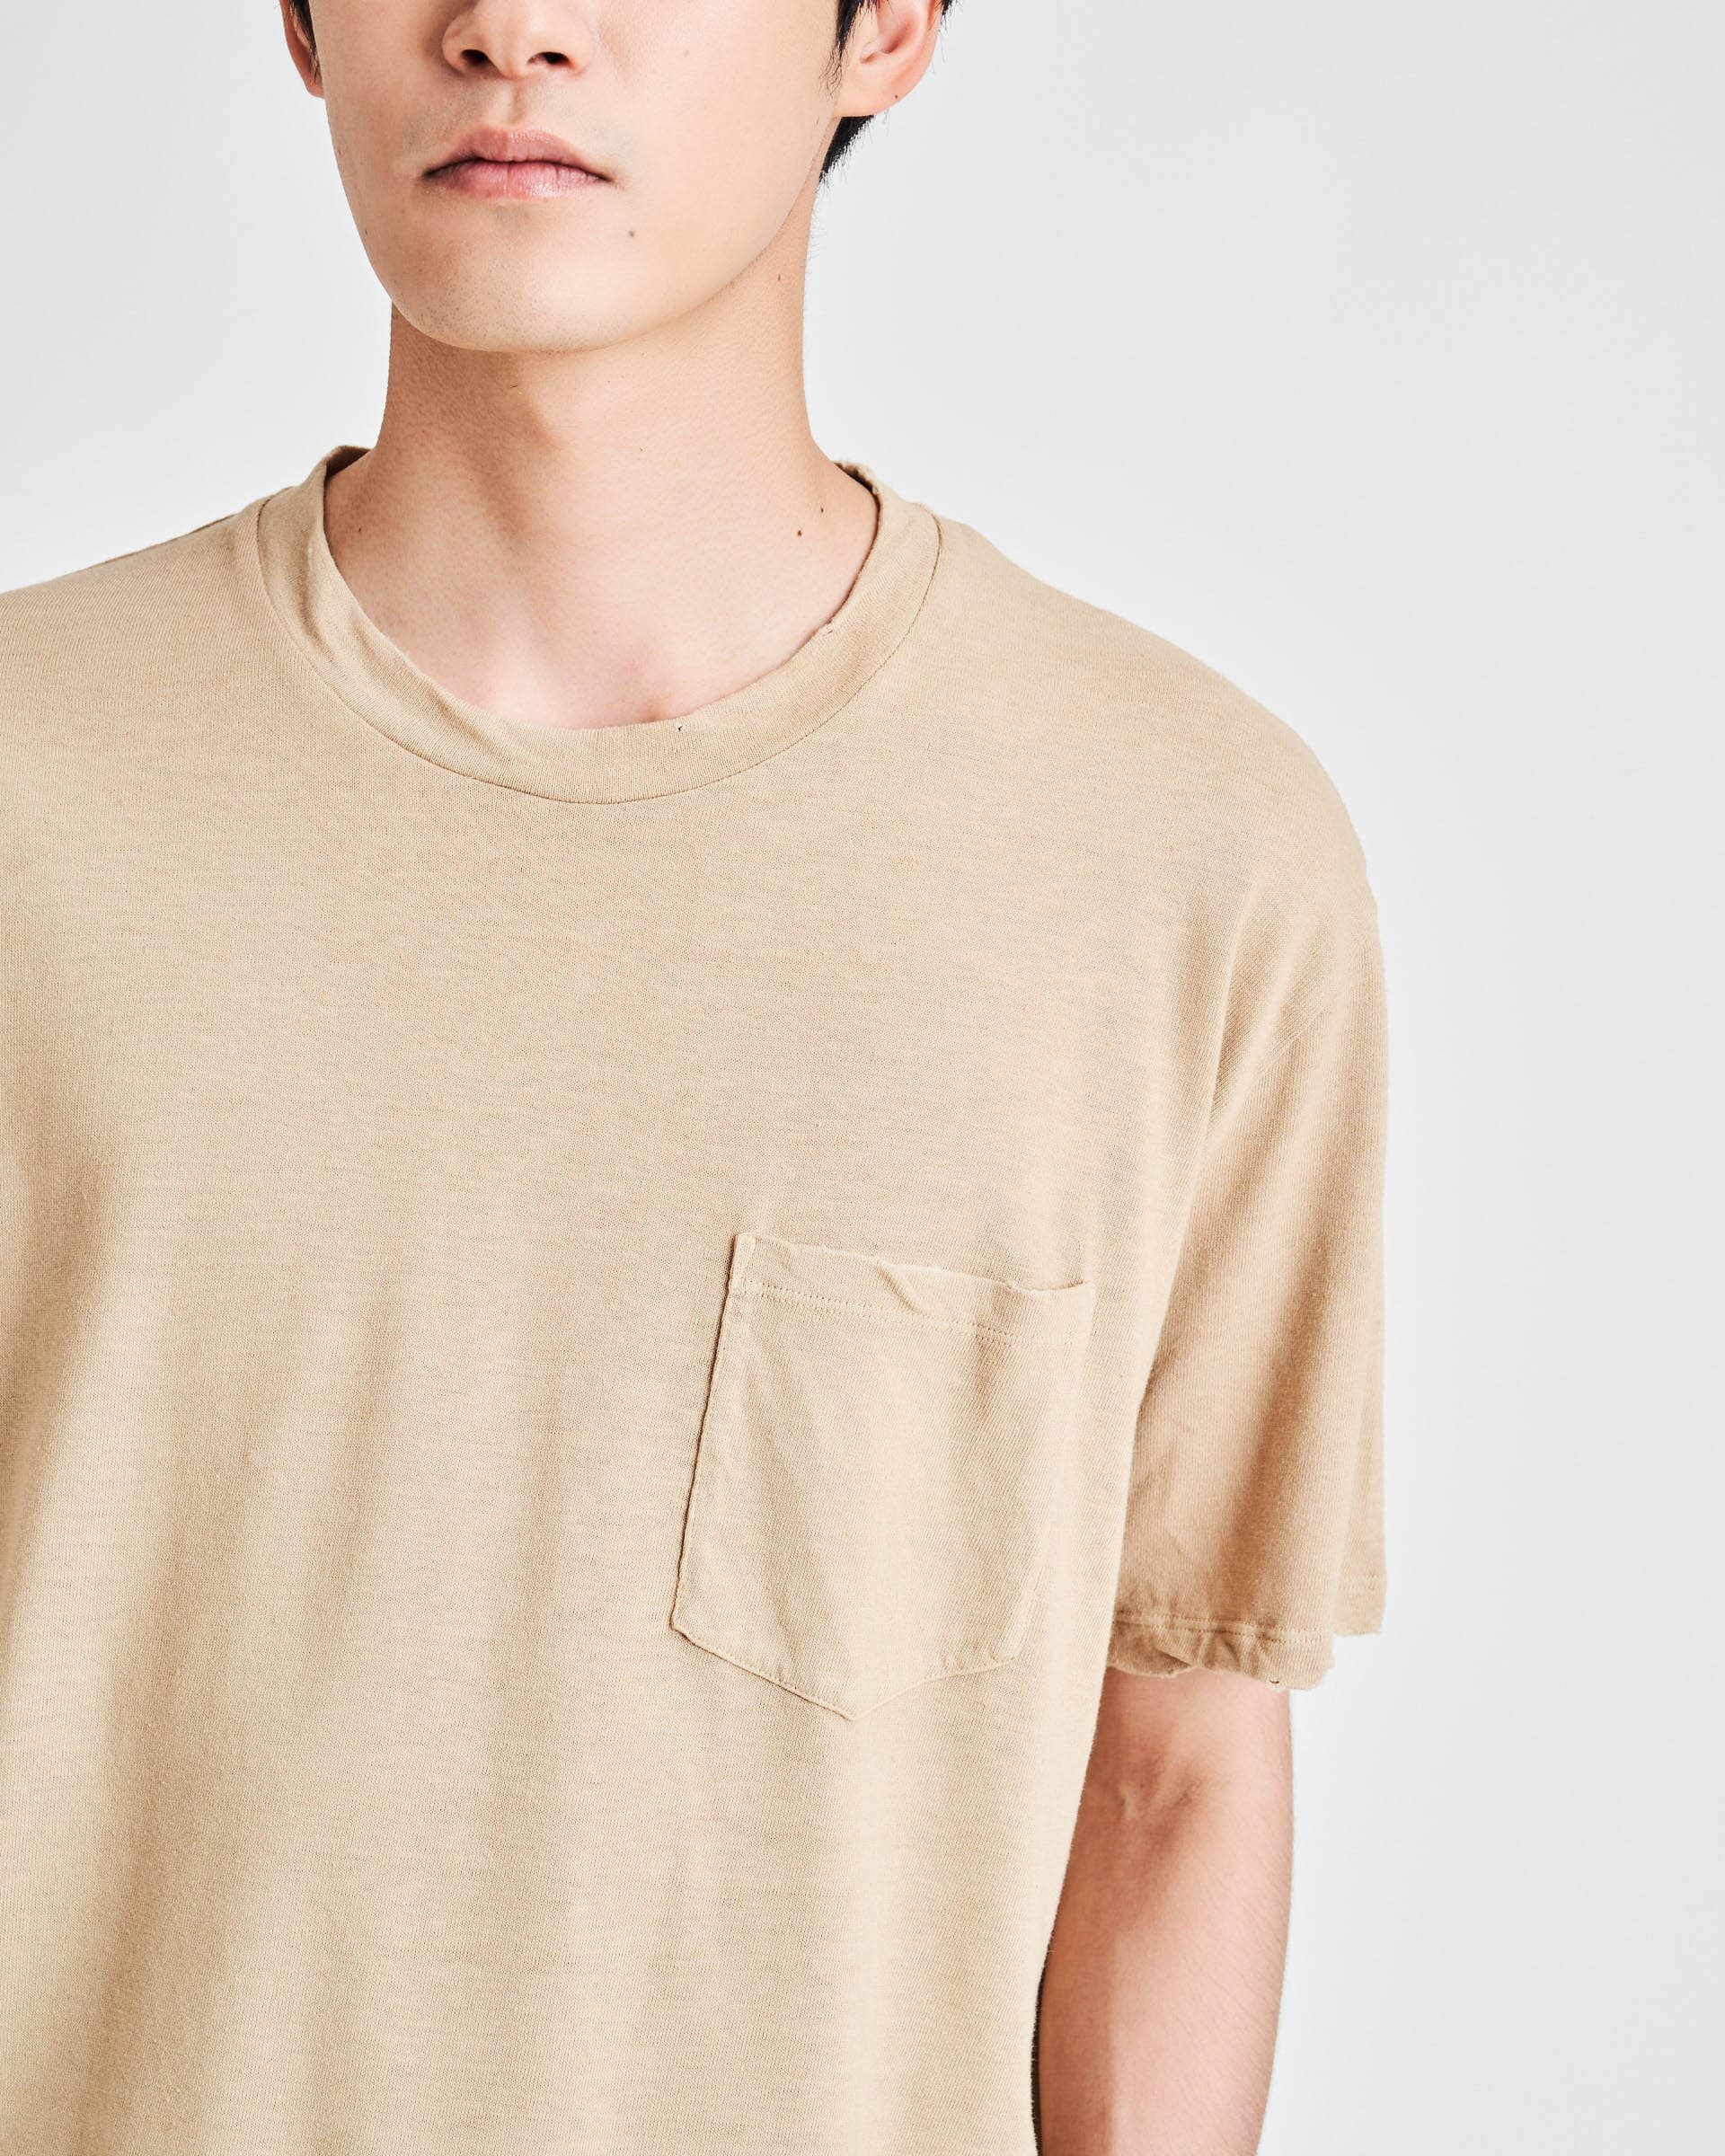 The Market Store | Distressed Round-neck T-shirt